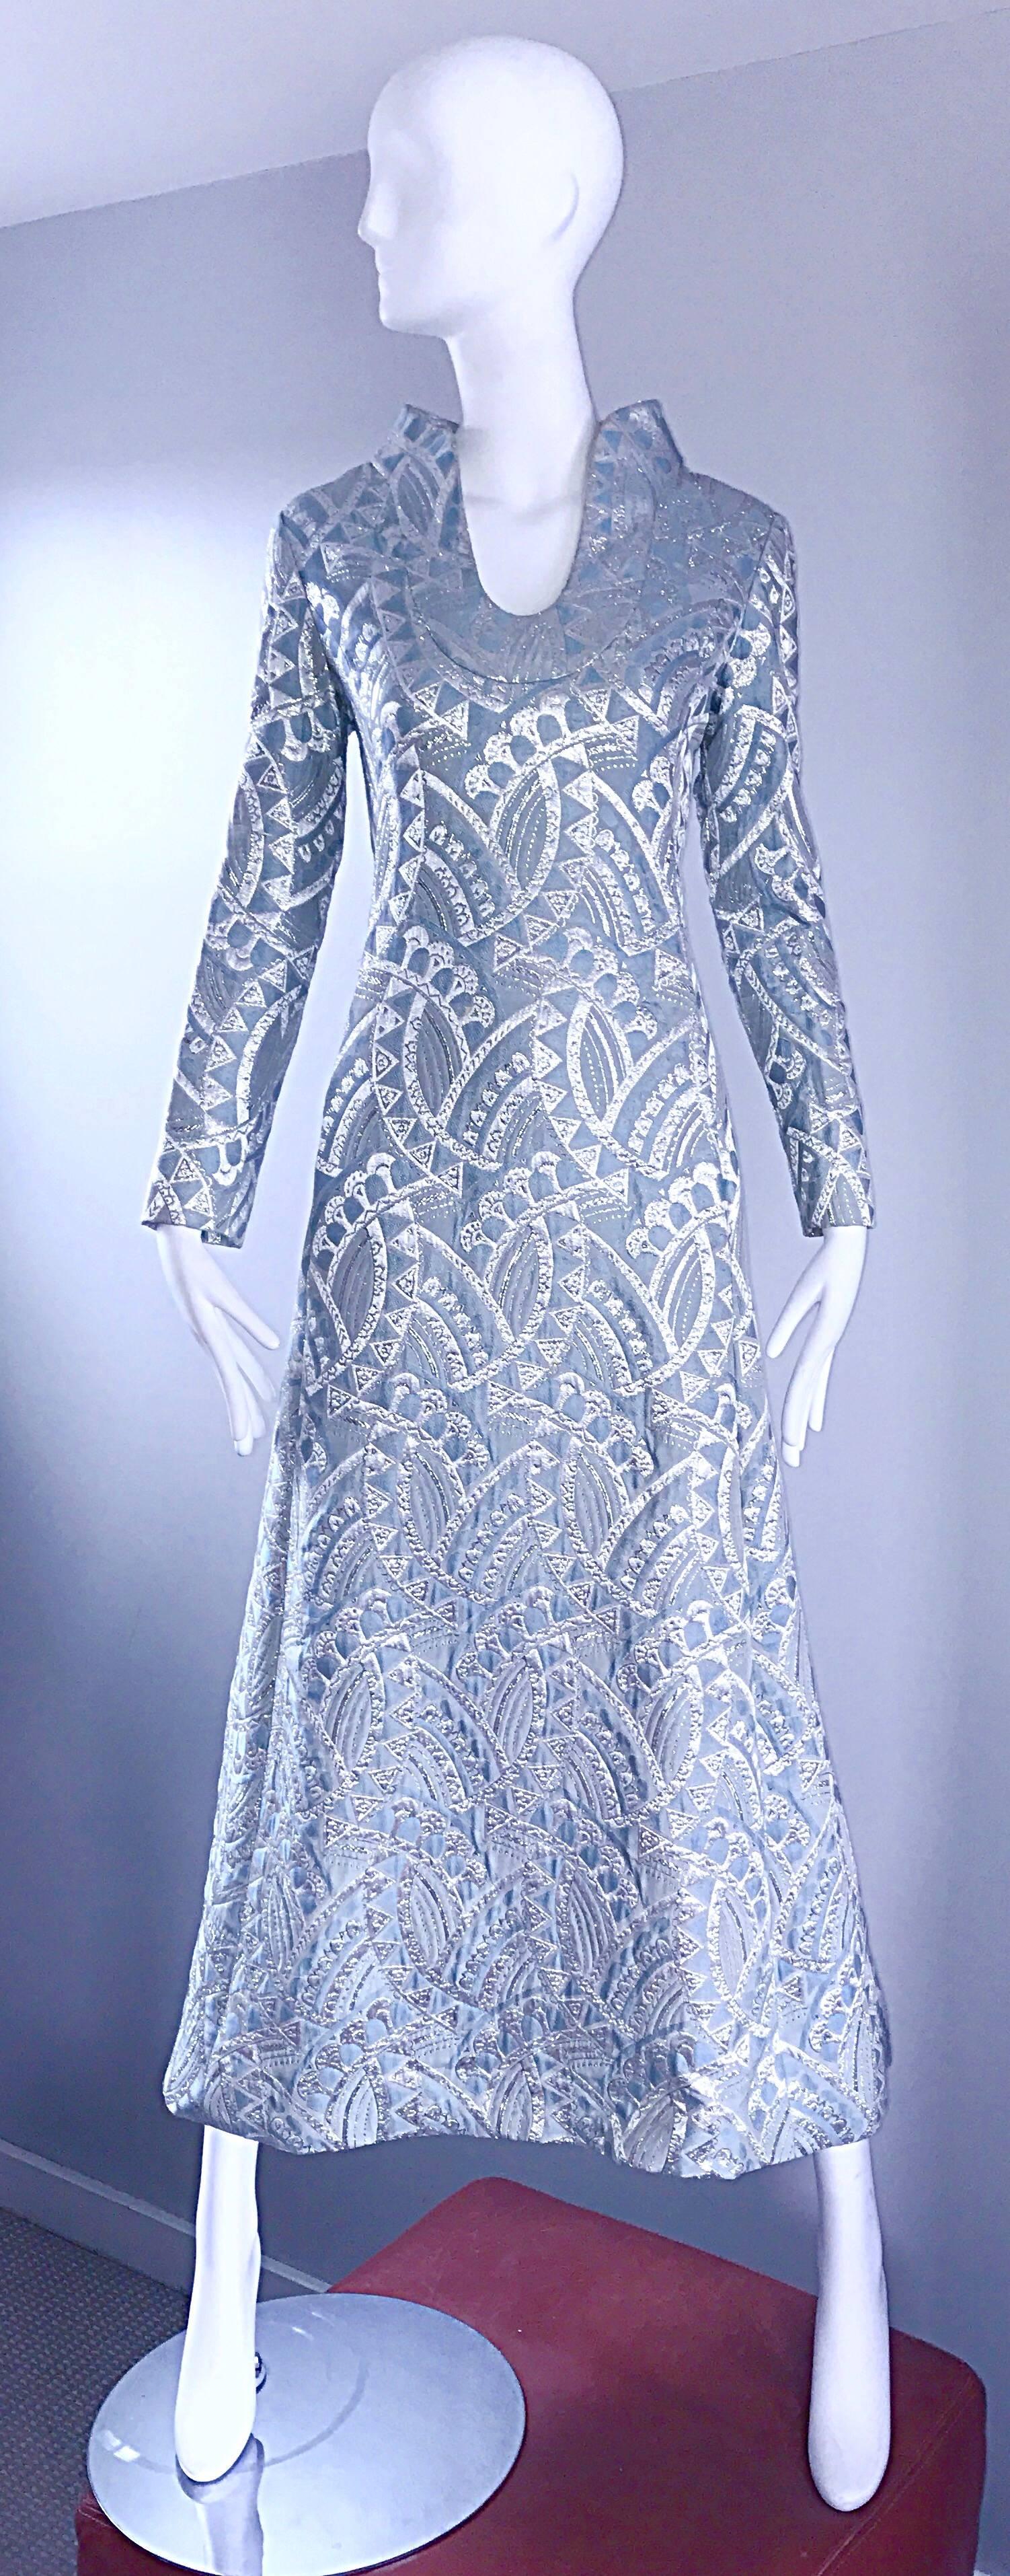 Beautiful vintage 60s (late 1960s, early 1970s 70s) RIZKALLAH for MALCOLM STARR pale blue and silver silk brocade long sleeve evening dress! Features allover silver metallic geometric patterns throughout. Wonderful fitted bodice, tailored long